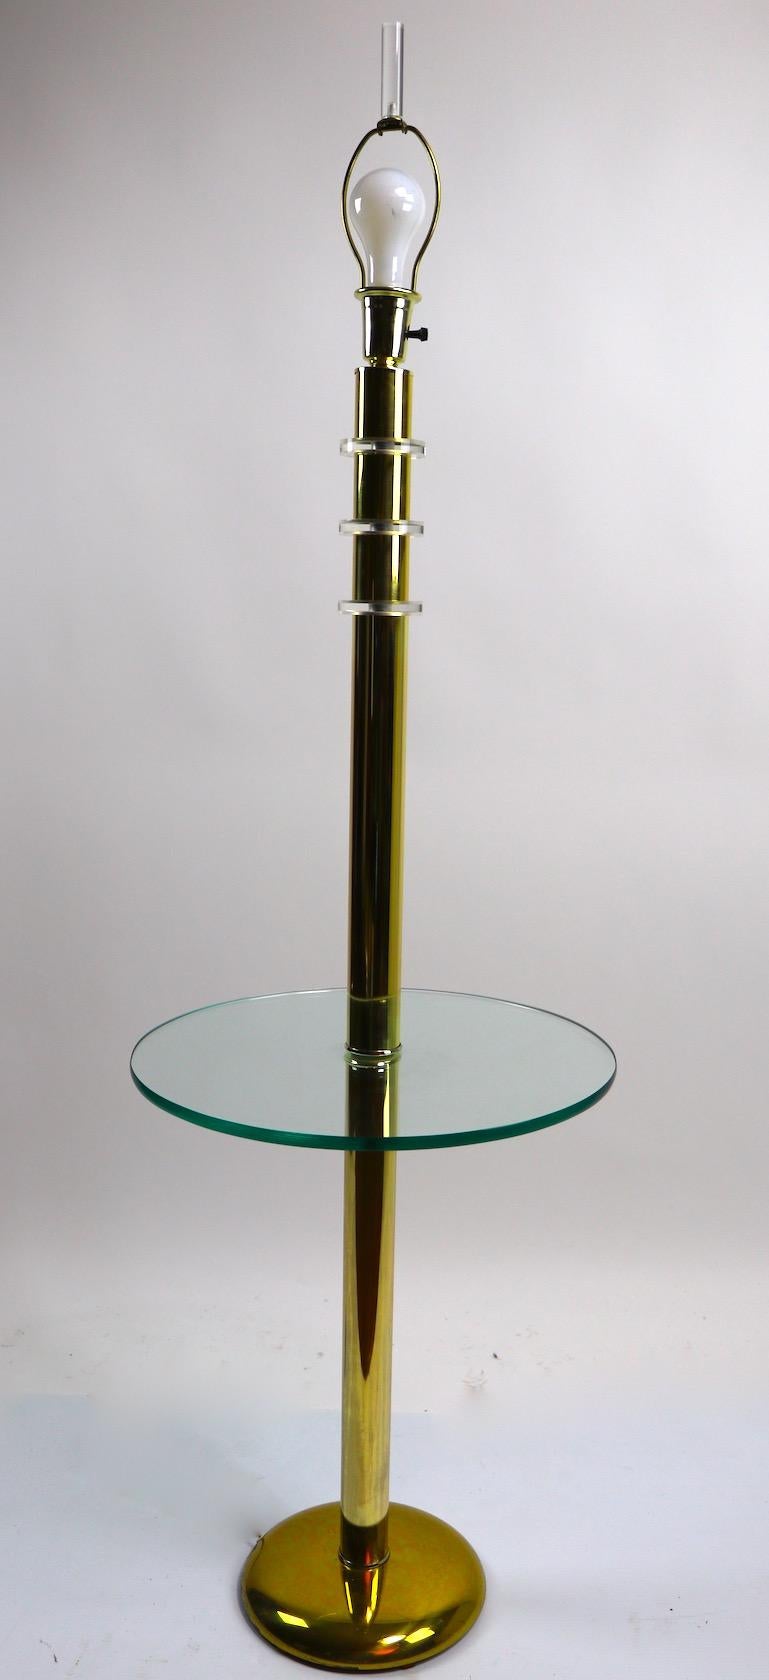 20th Century Brass Lucite and Glass Floor Table Lamp by the Clover Lamp Company